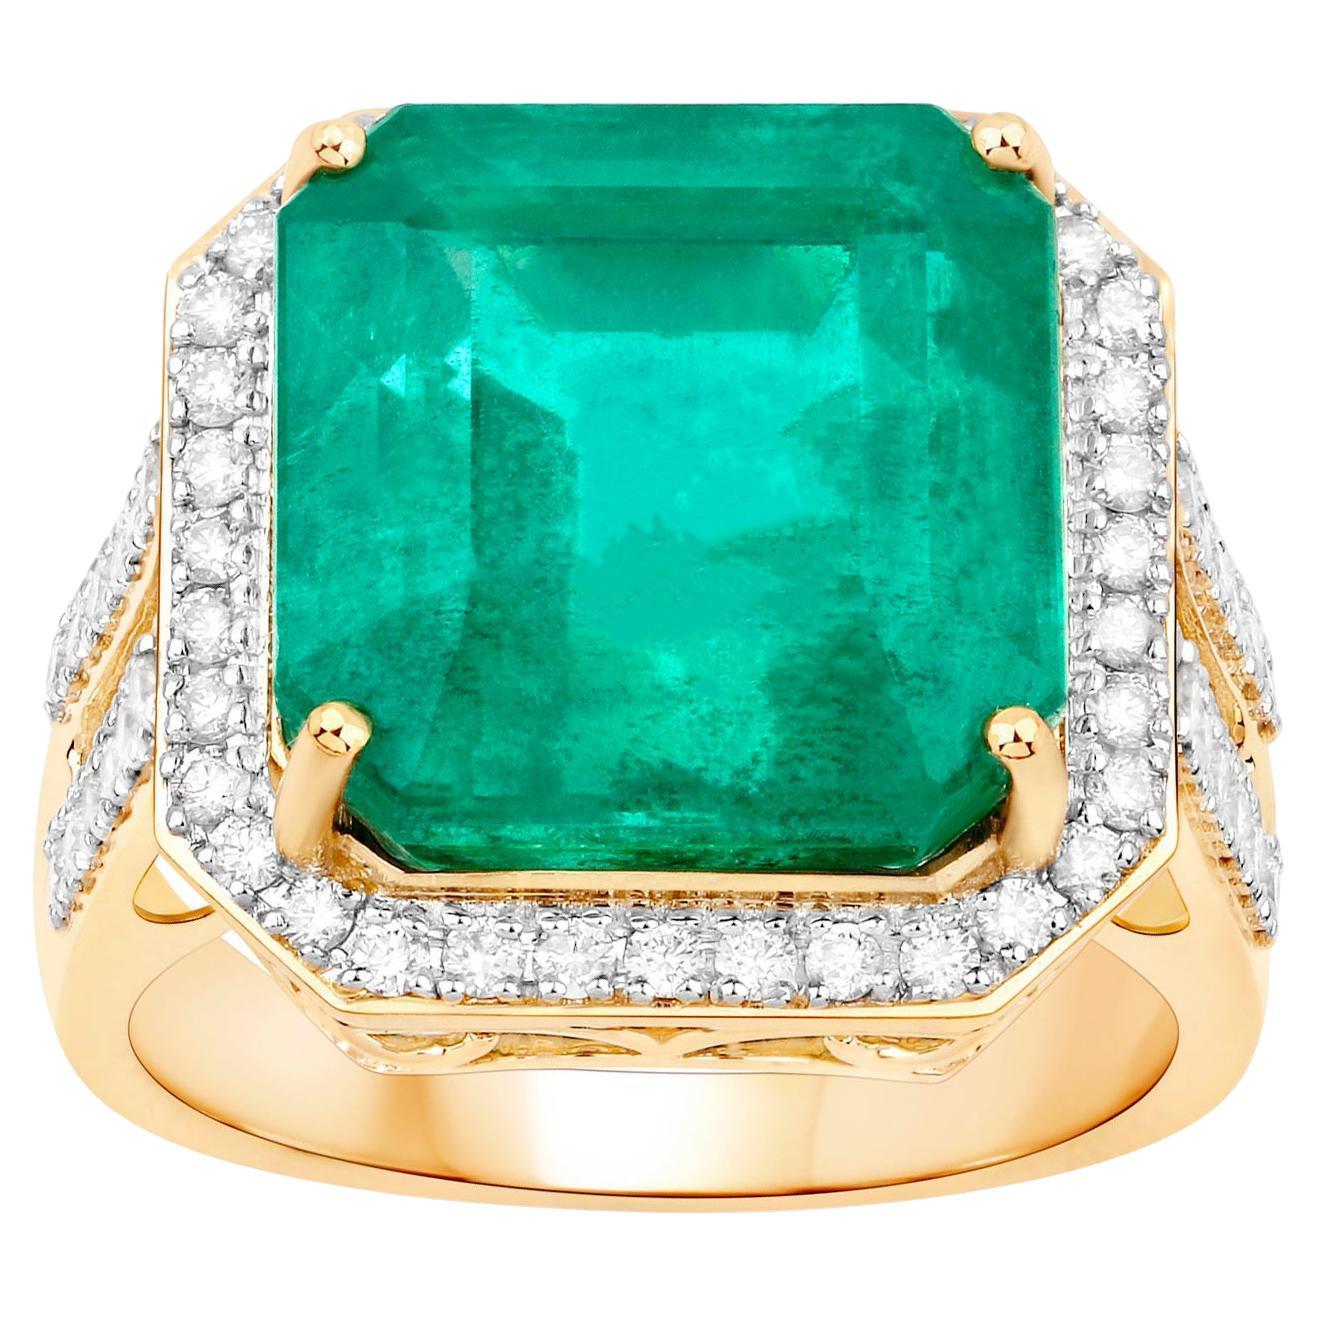 IGI Certified Zambian Emerald Ring With Diamonds 13.06 Carats 14K Yellow Gold For Sale